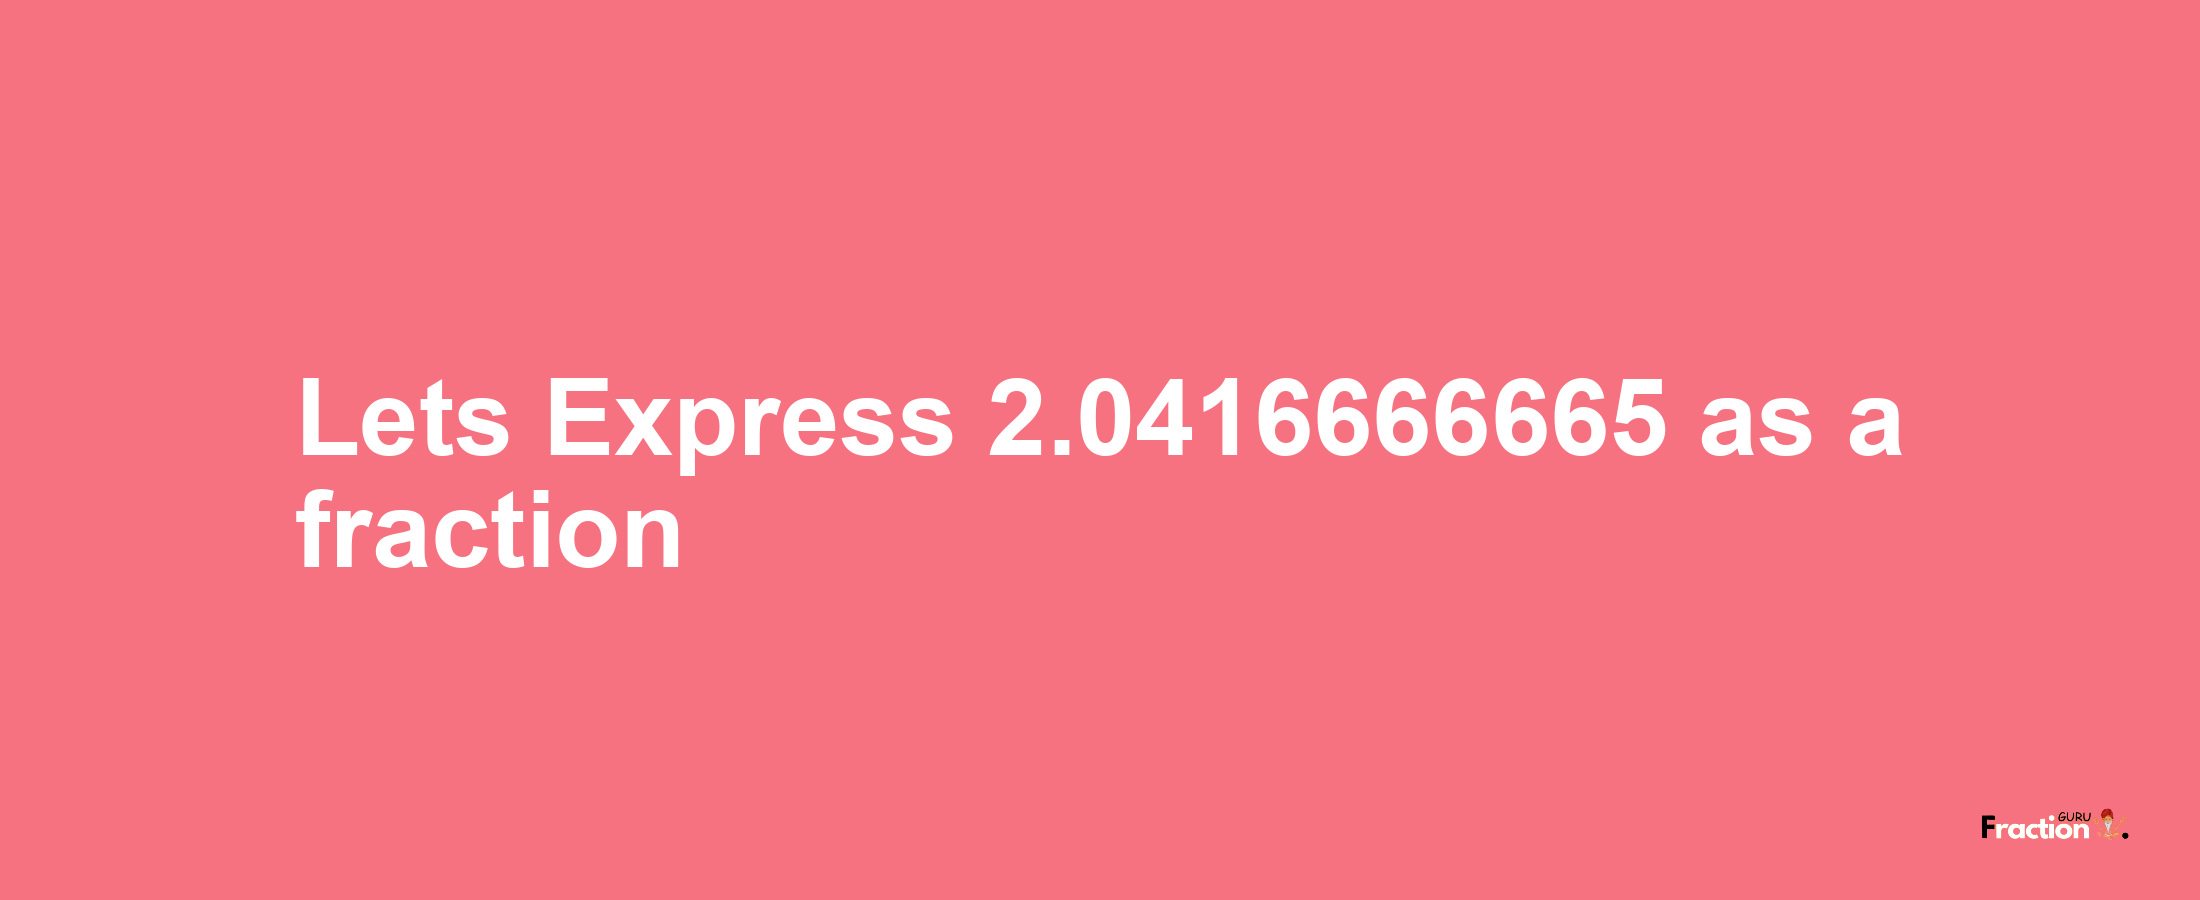 Lets Express 2.0416666665 as afraction